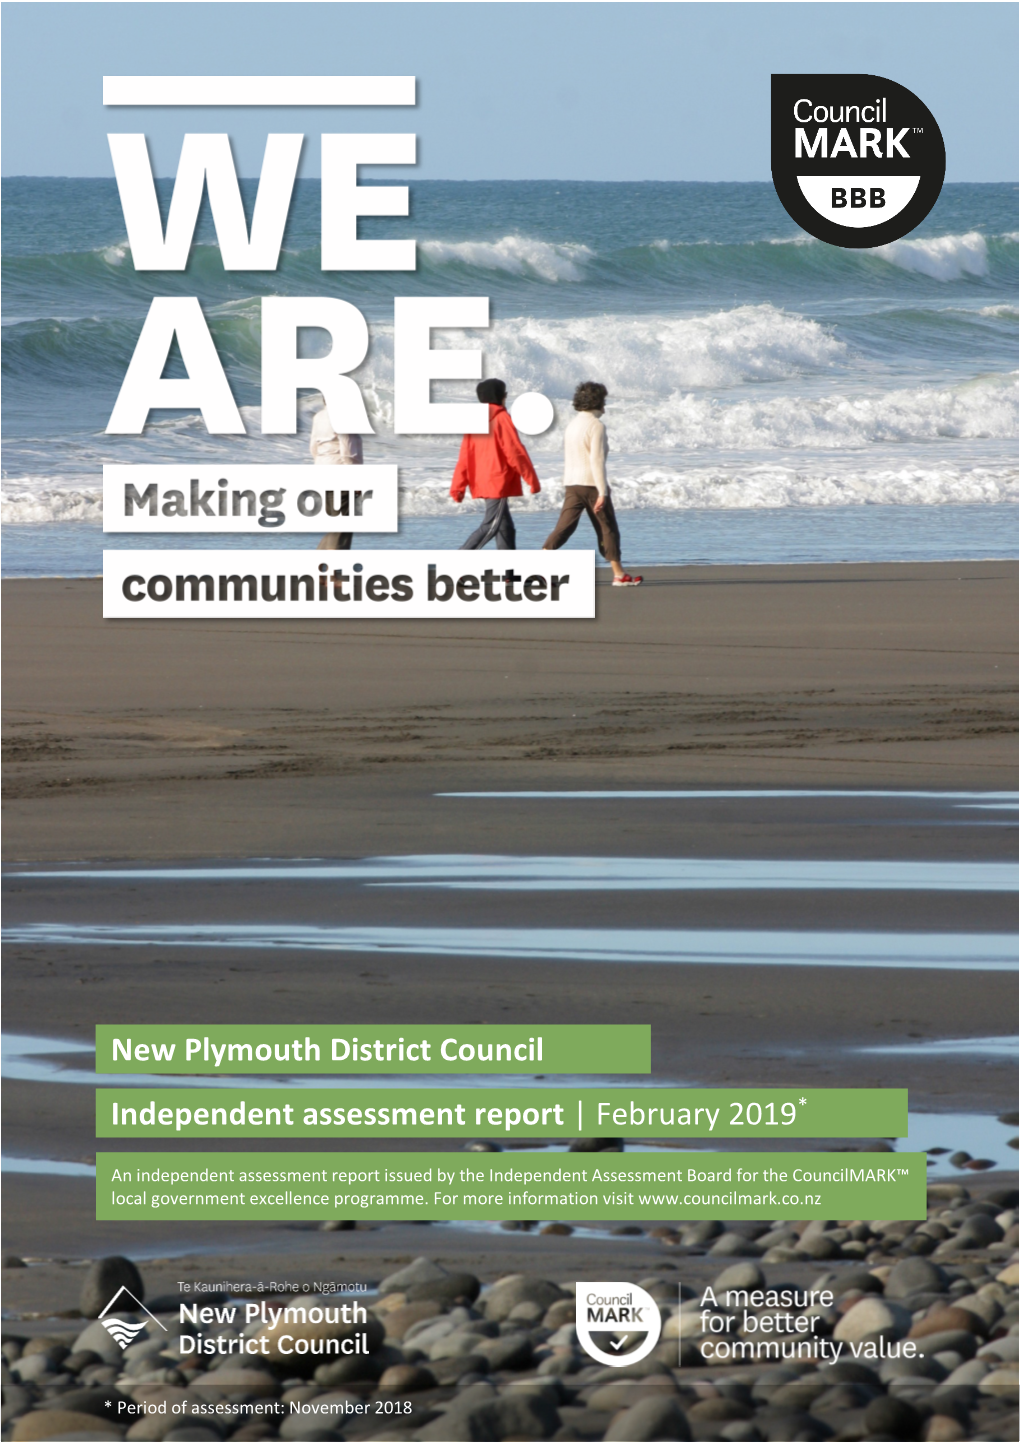 February 2019* New Plymouth District Council